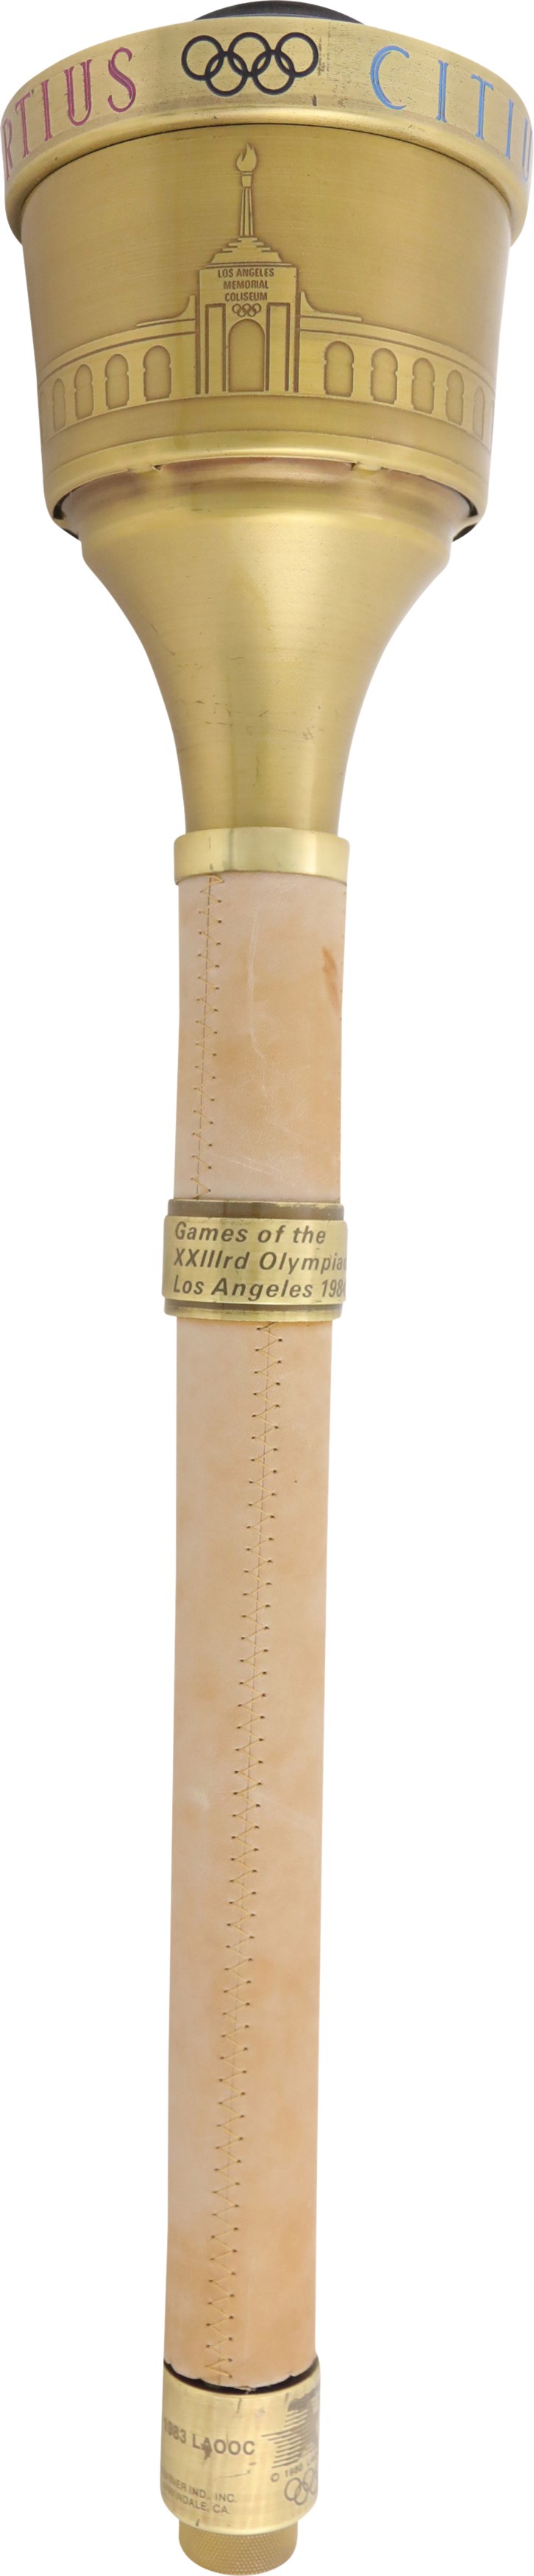 1984 Los Angeles Olympics Summer Games Relay Torch